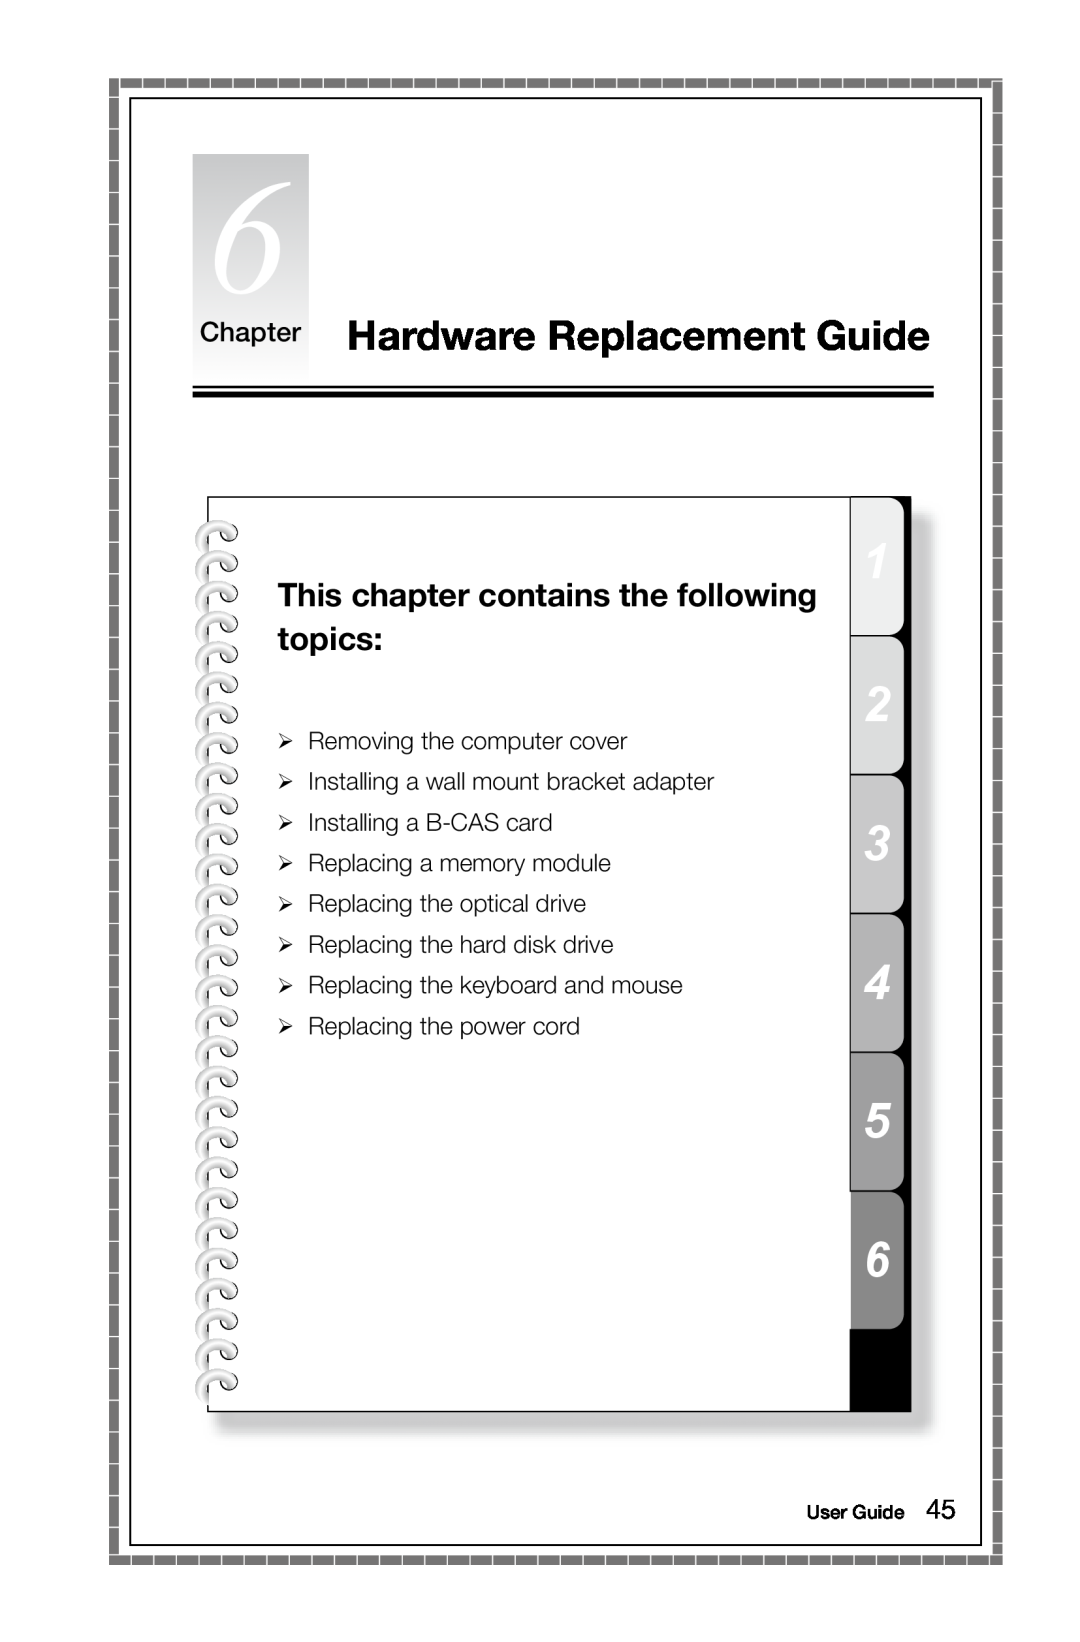 Lenovo 3363 [B540p] 10098, 97 Chapter Hardware Replacement Guide, This chapter contains the following topics, User Guide 